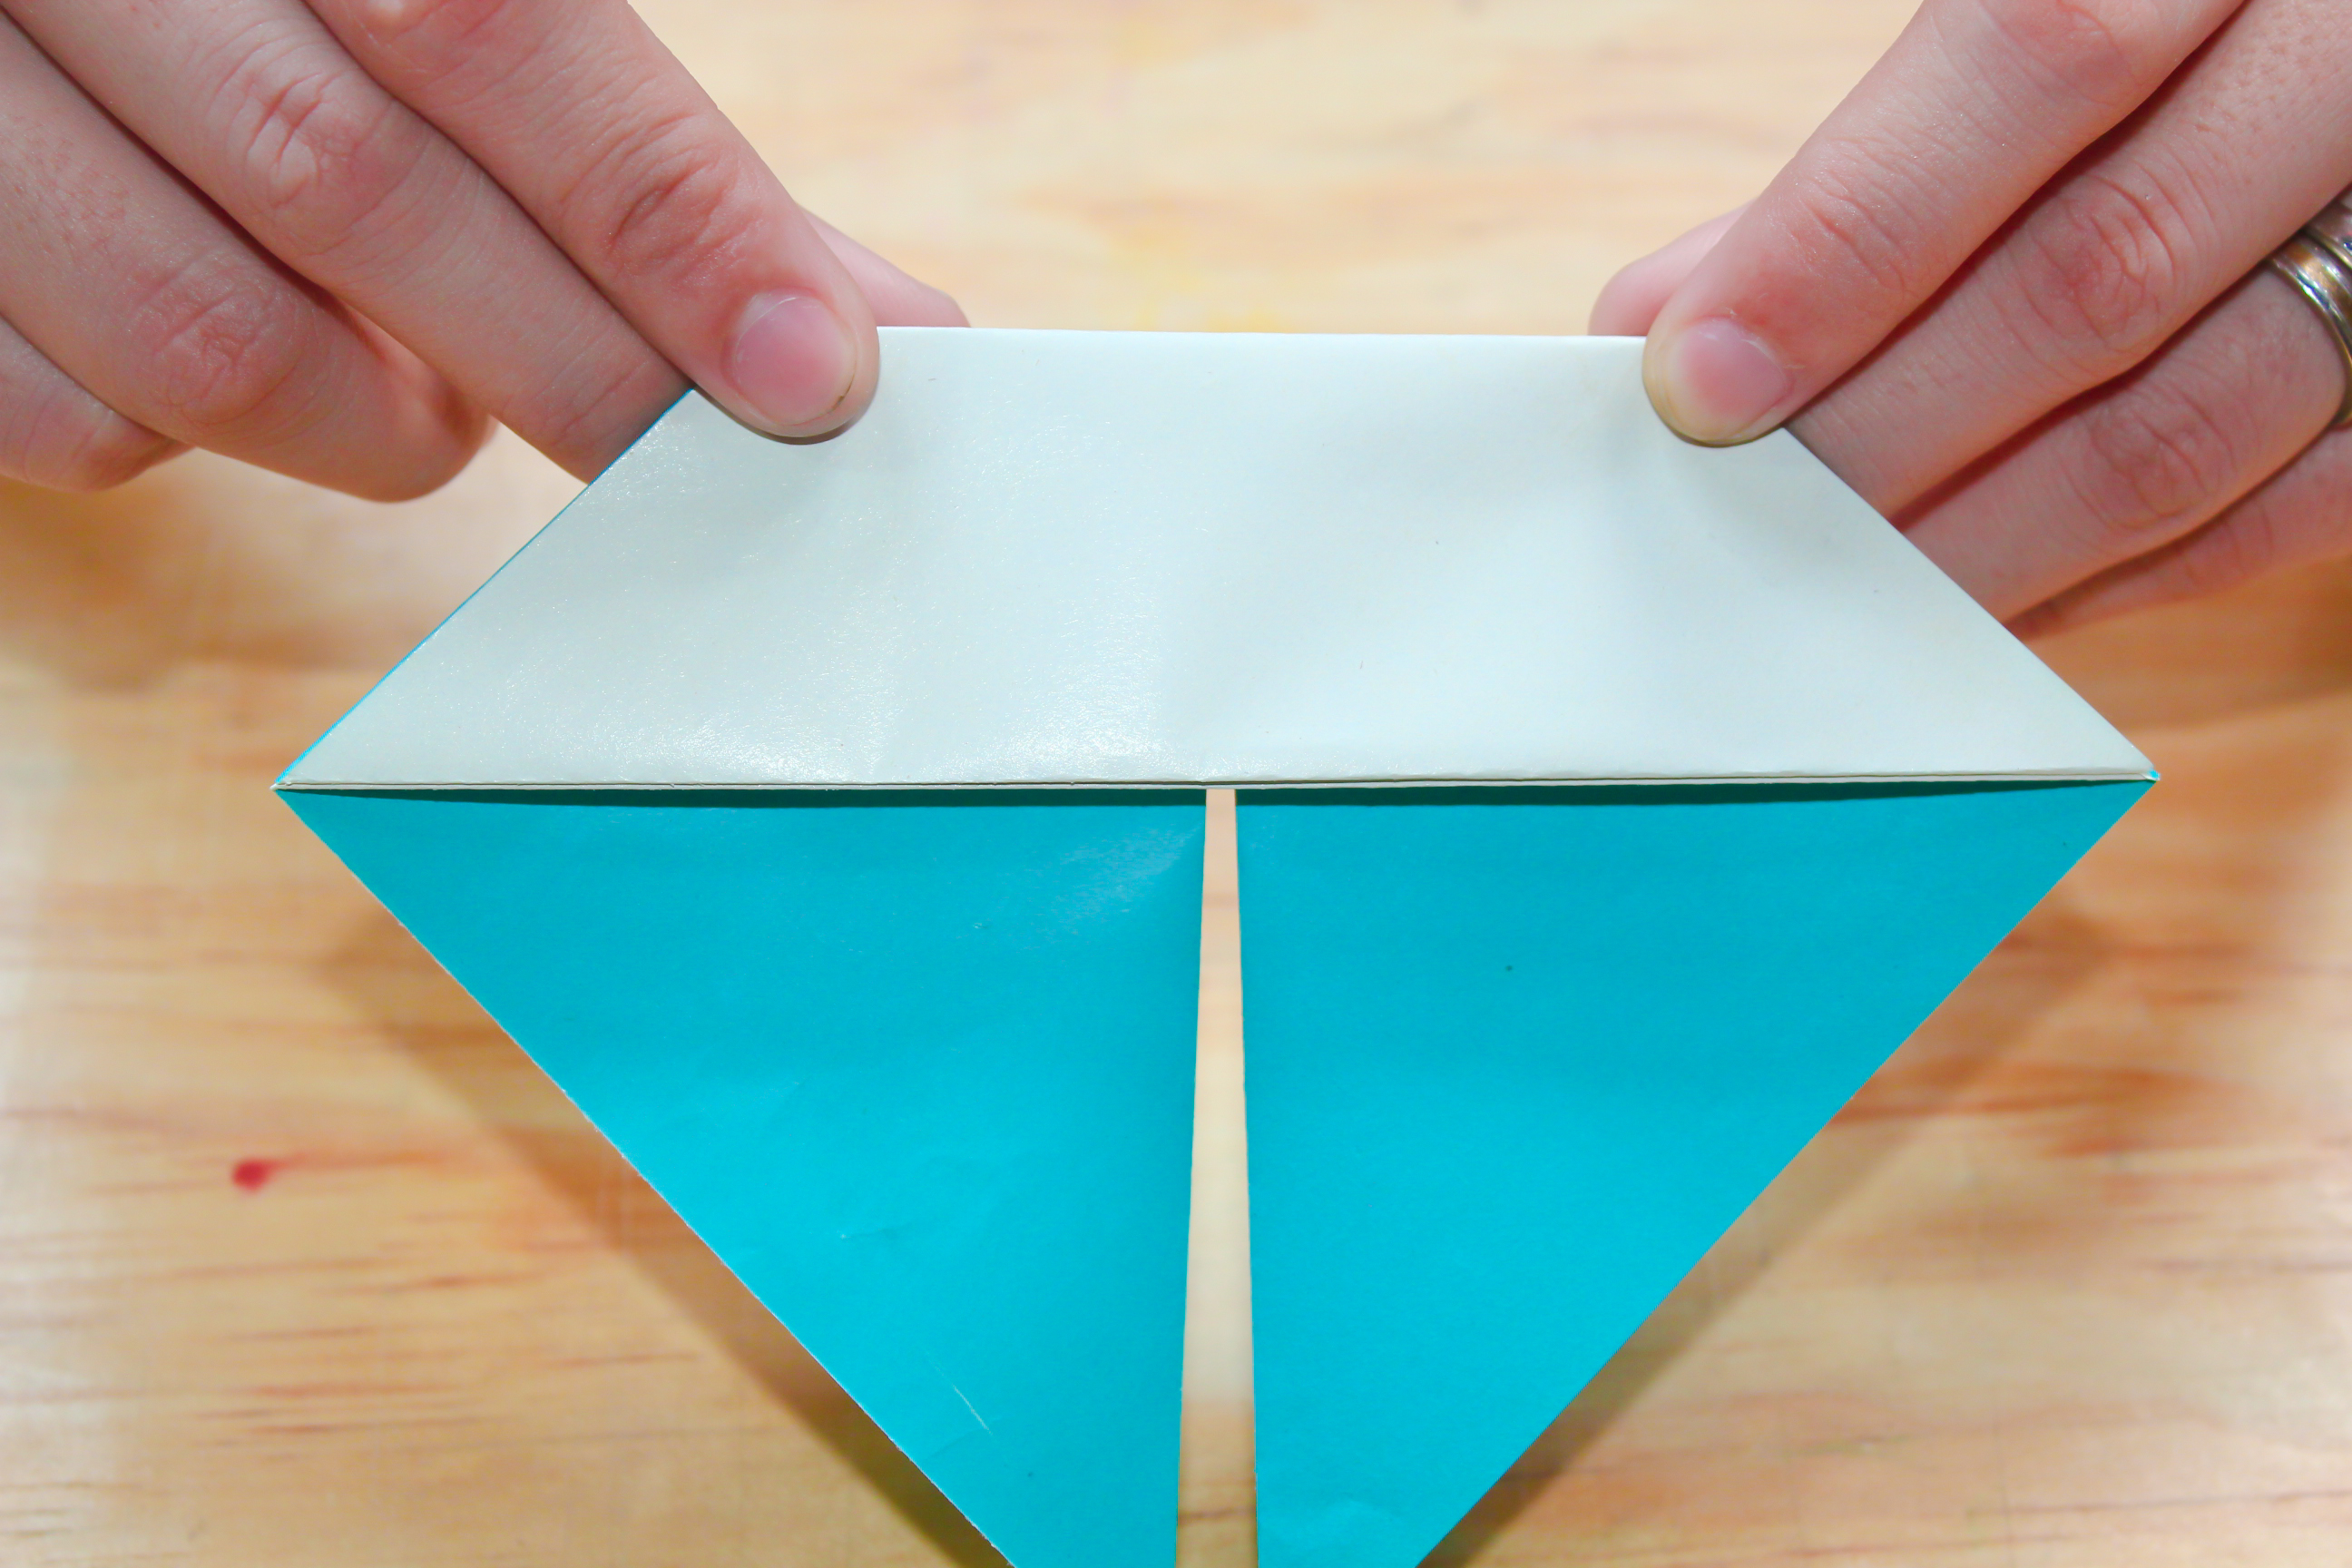 How Do You Make An Origami How To Make An Origami Sailboat 9 Steps With Pictures Wikihow